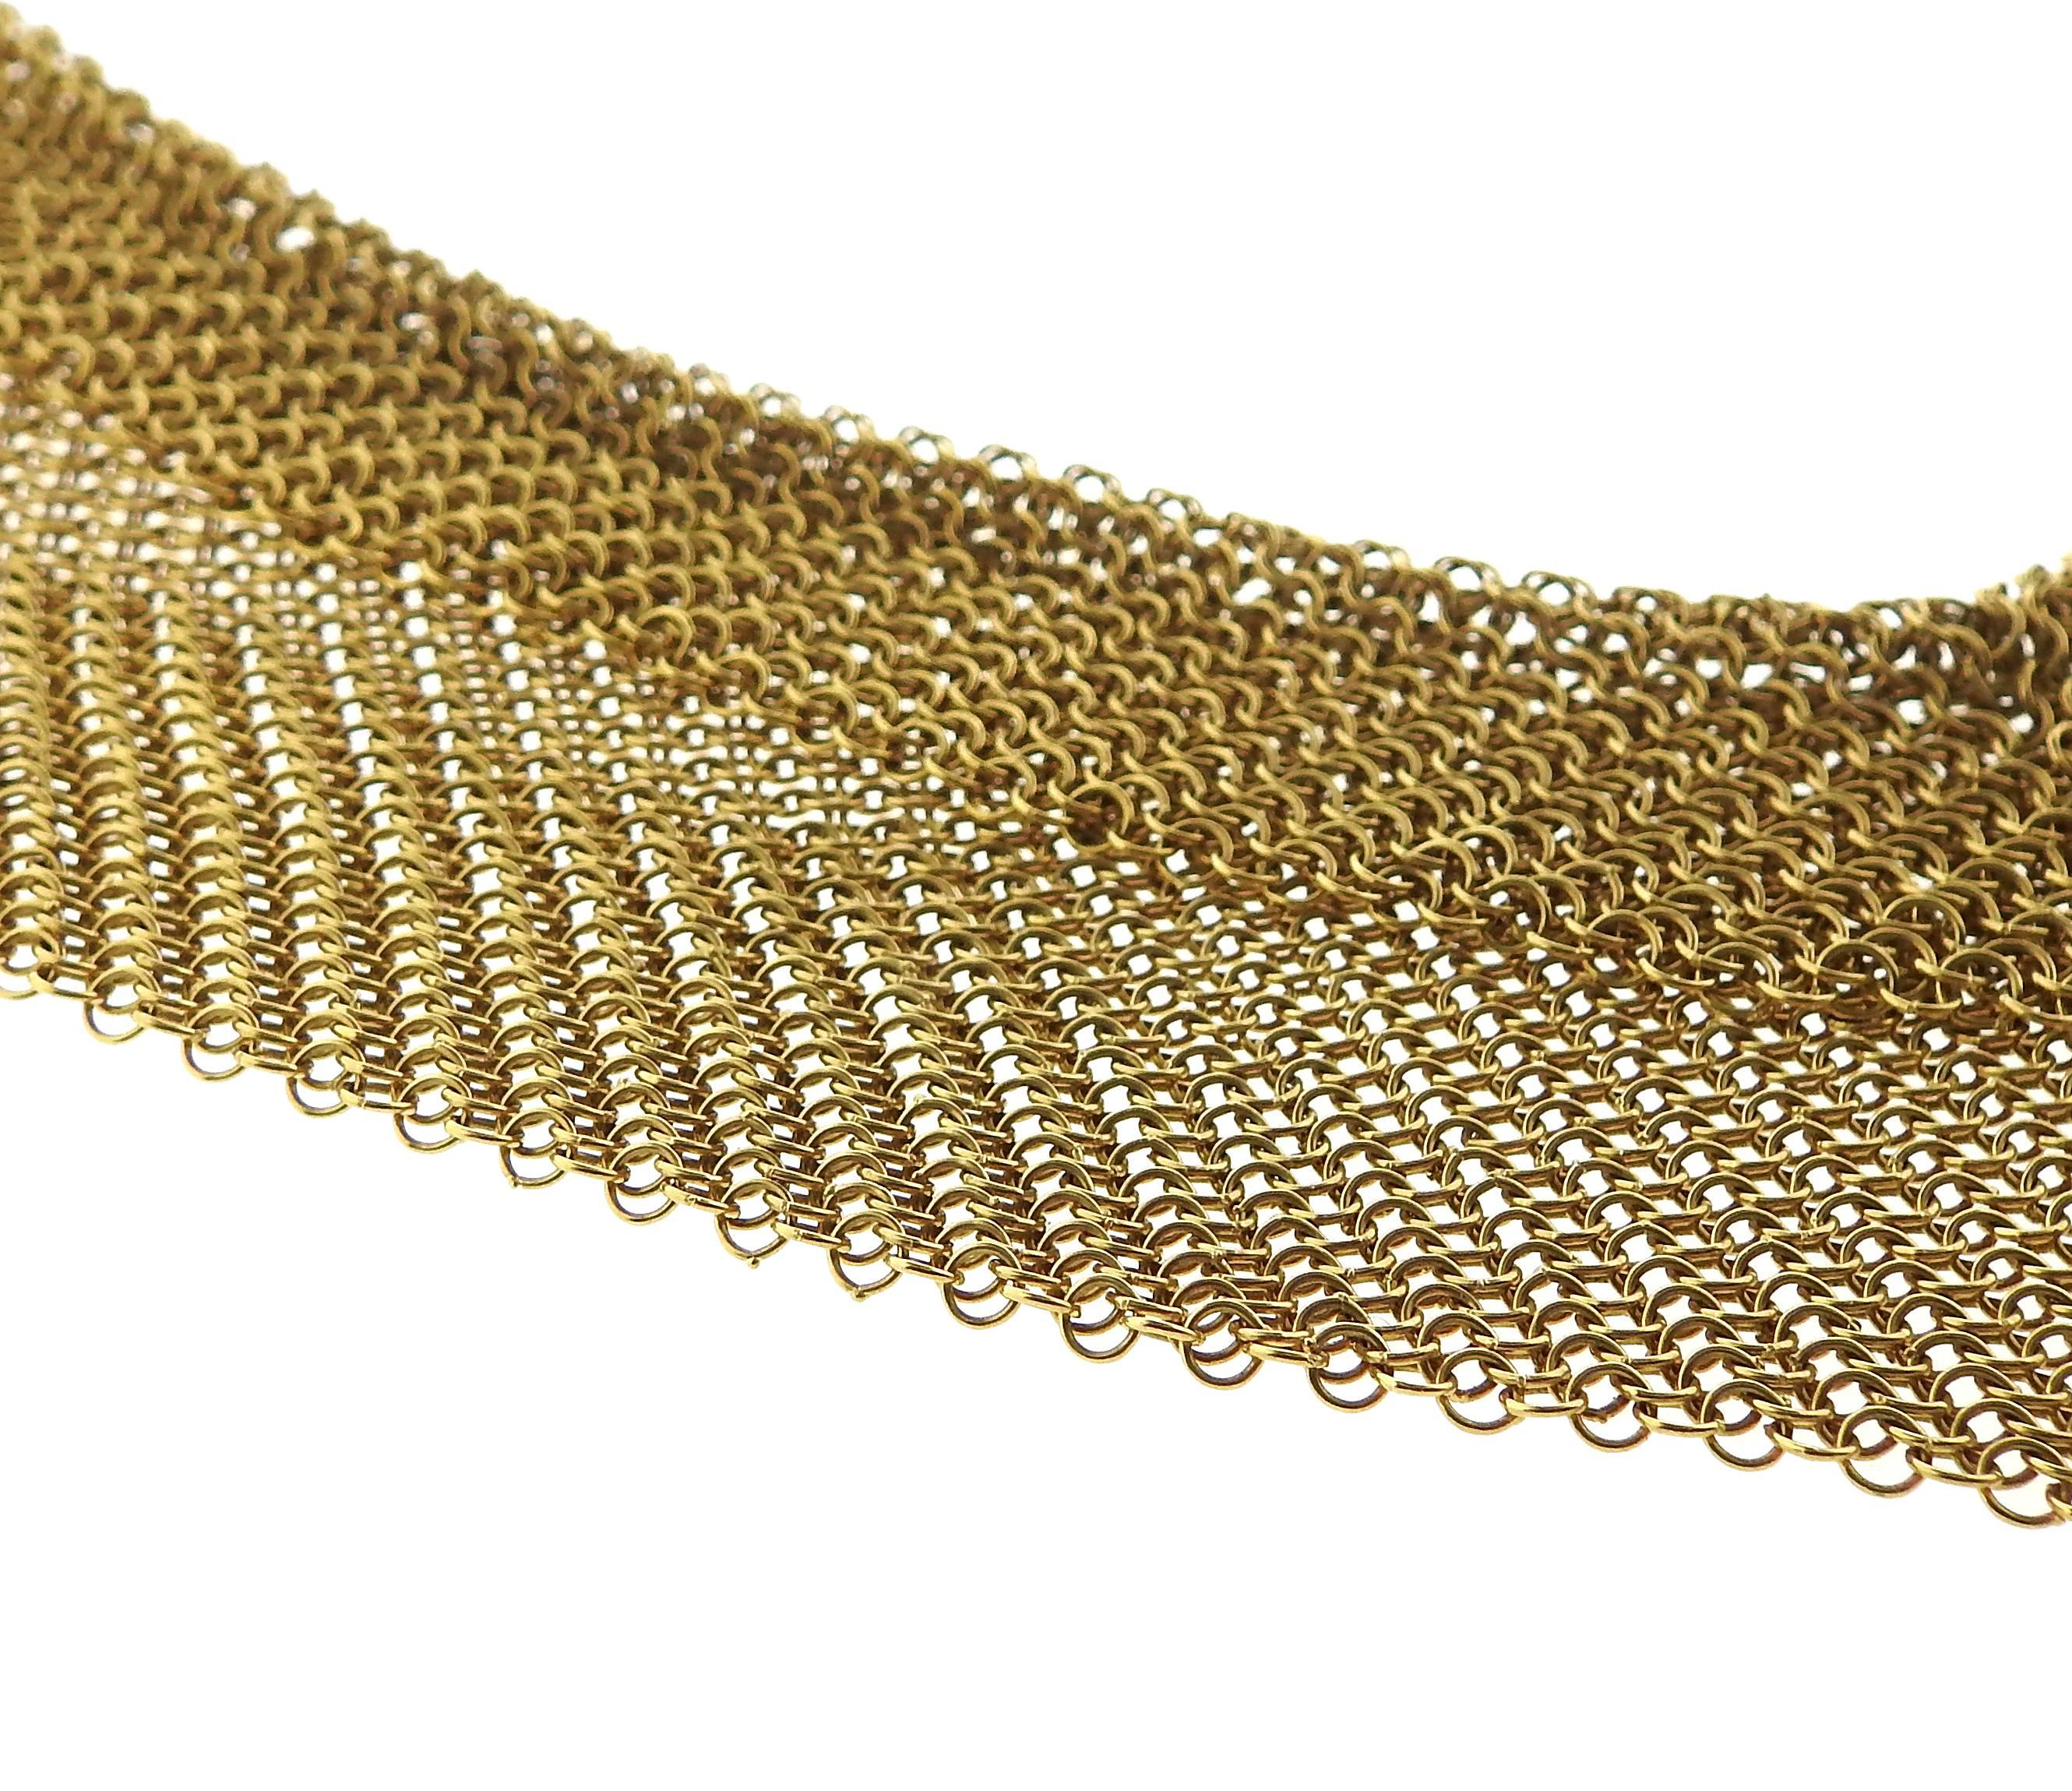 Rare 18k yellow gold collar mesh necklace, designed by Elsa Peretti for Tiffany & Co. Entire length of the necklace is 26 1/2" long, center widest section is 56mm wide. Marked: Peretti, 18k, Tiffany &  Co. Weight - 142.5 grams 